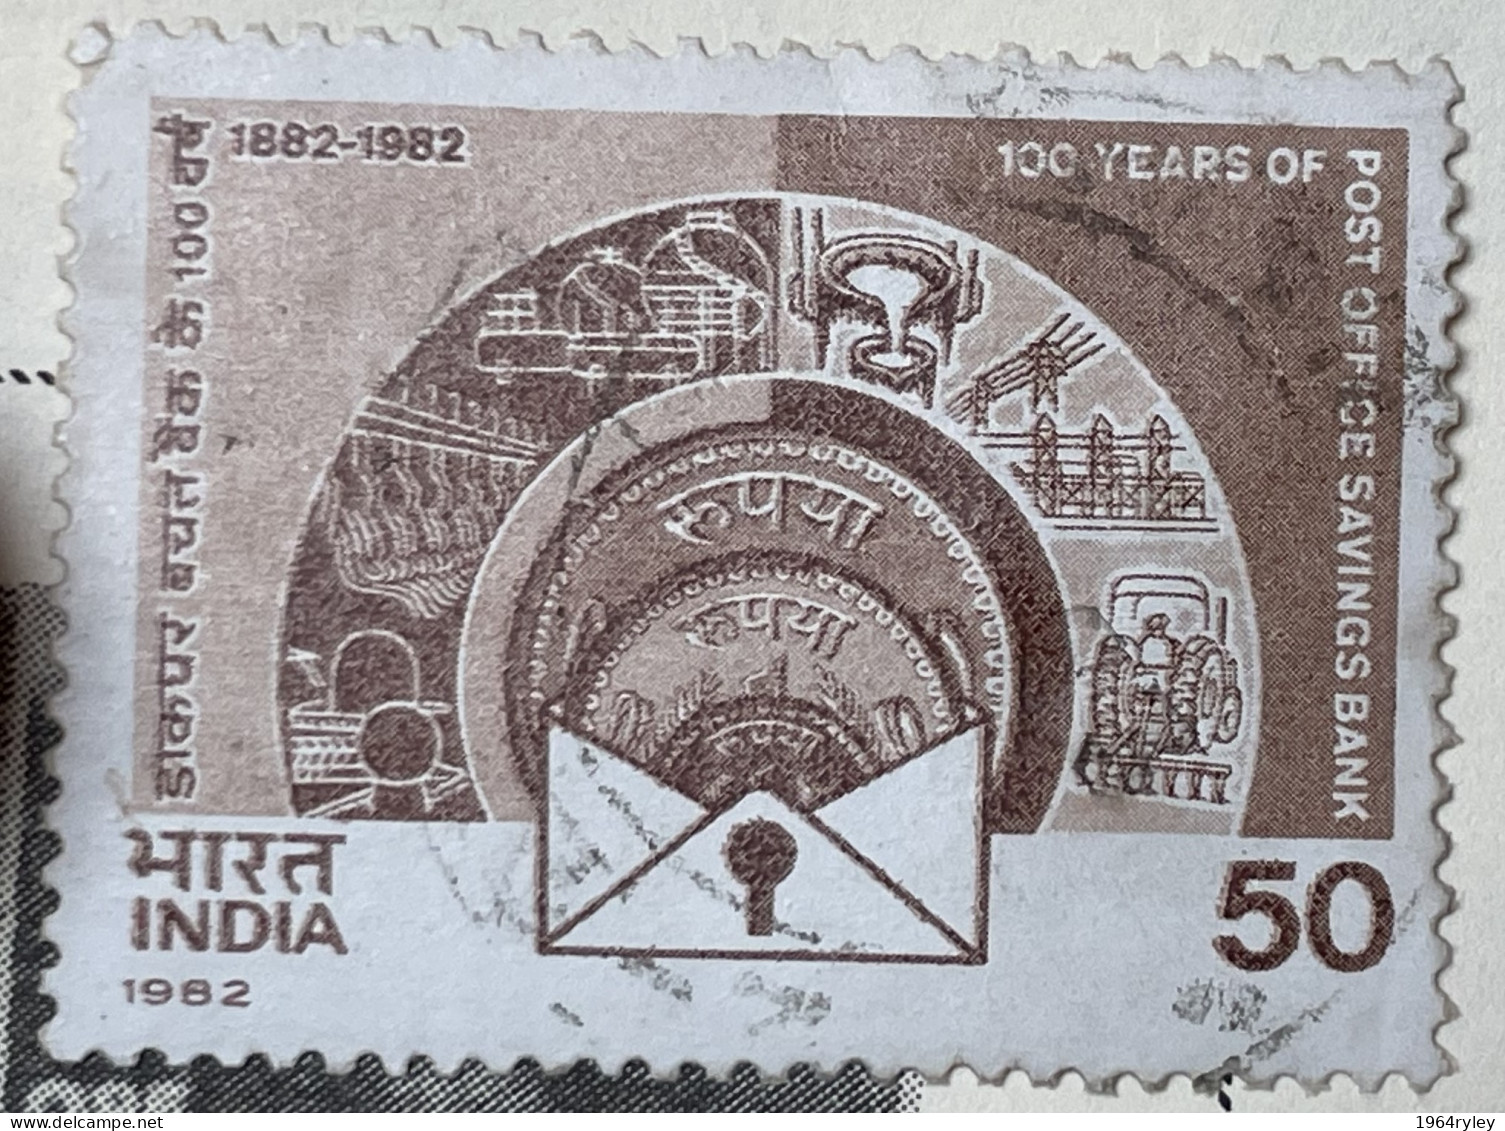 INDIA - (0) - 1982  #  992    SEE PHOTO FOR CONDITION OF STAMP(S) - Gebruikt